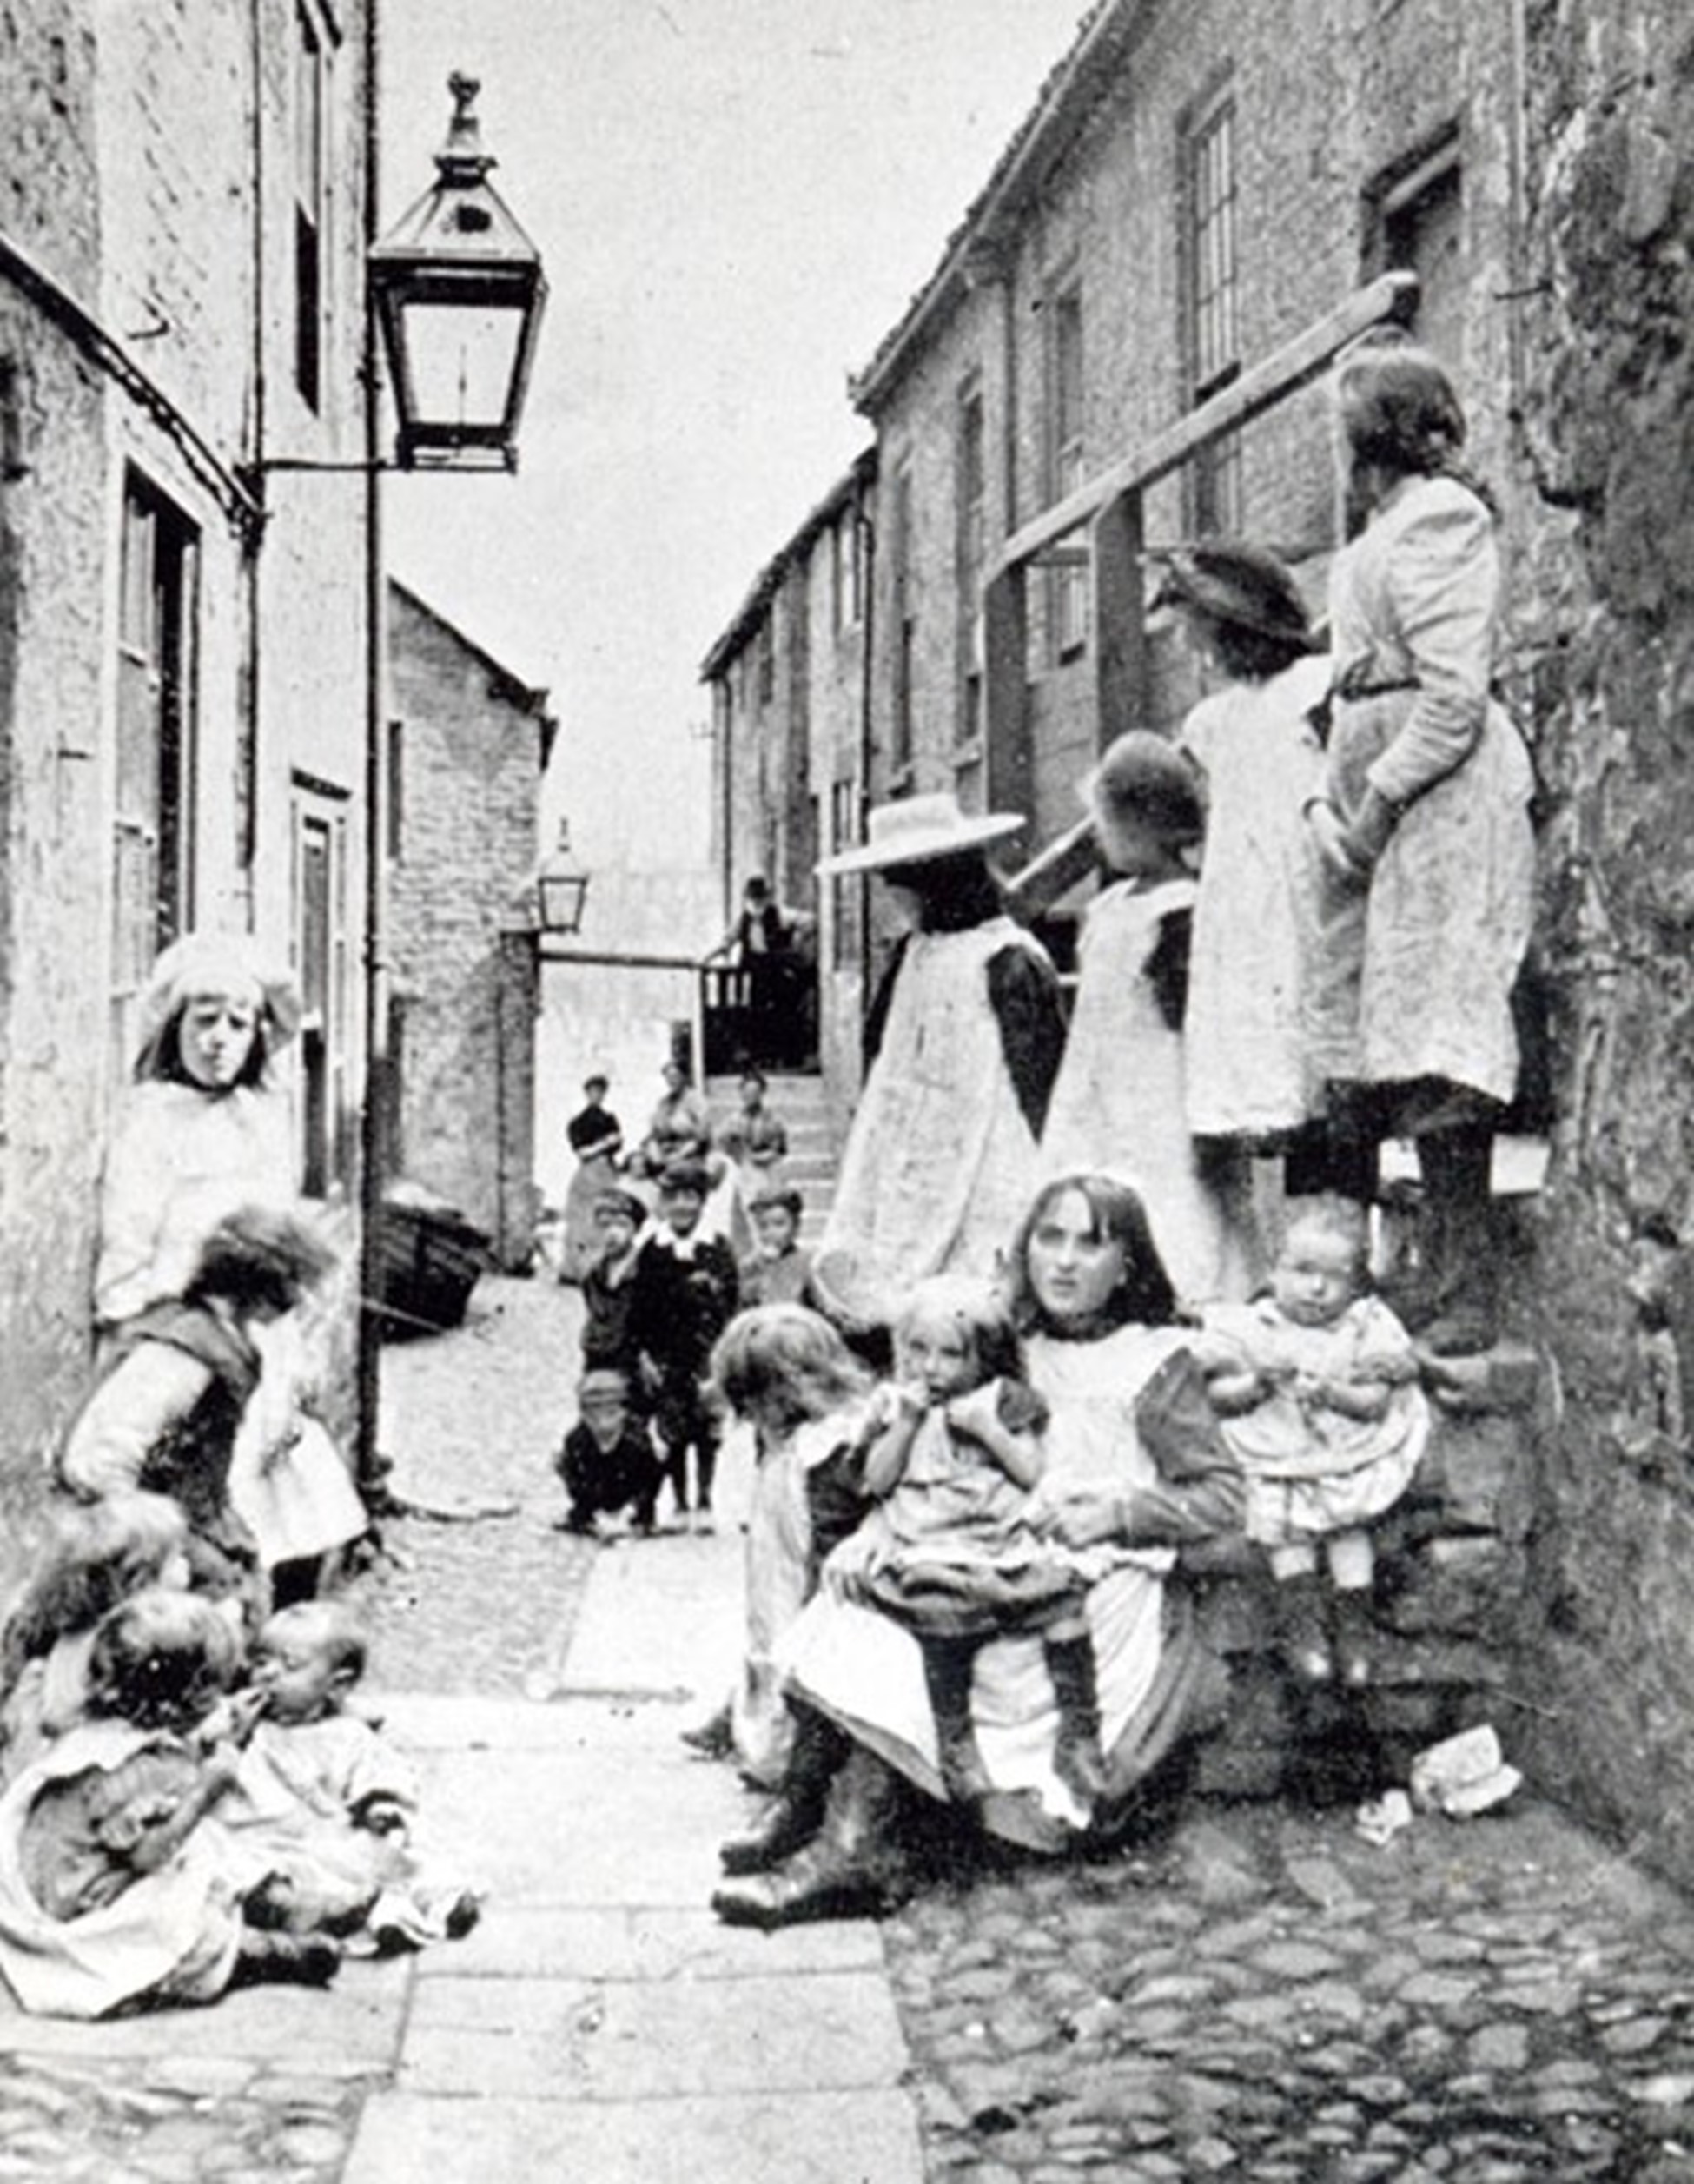 blank and white photo of girls and women in an alley